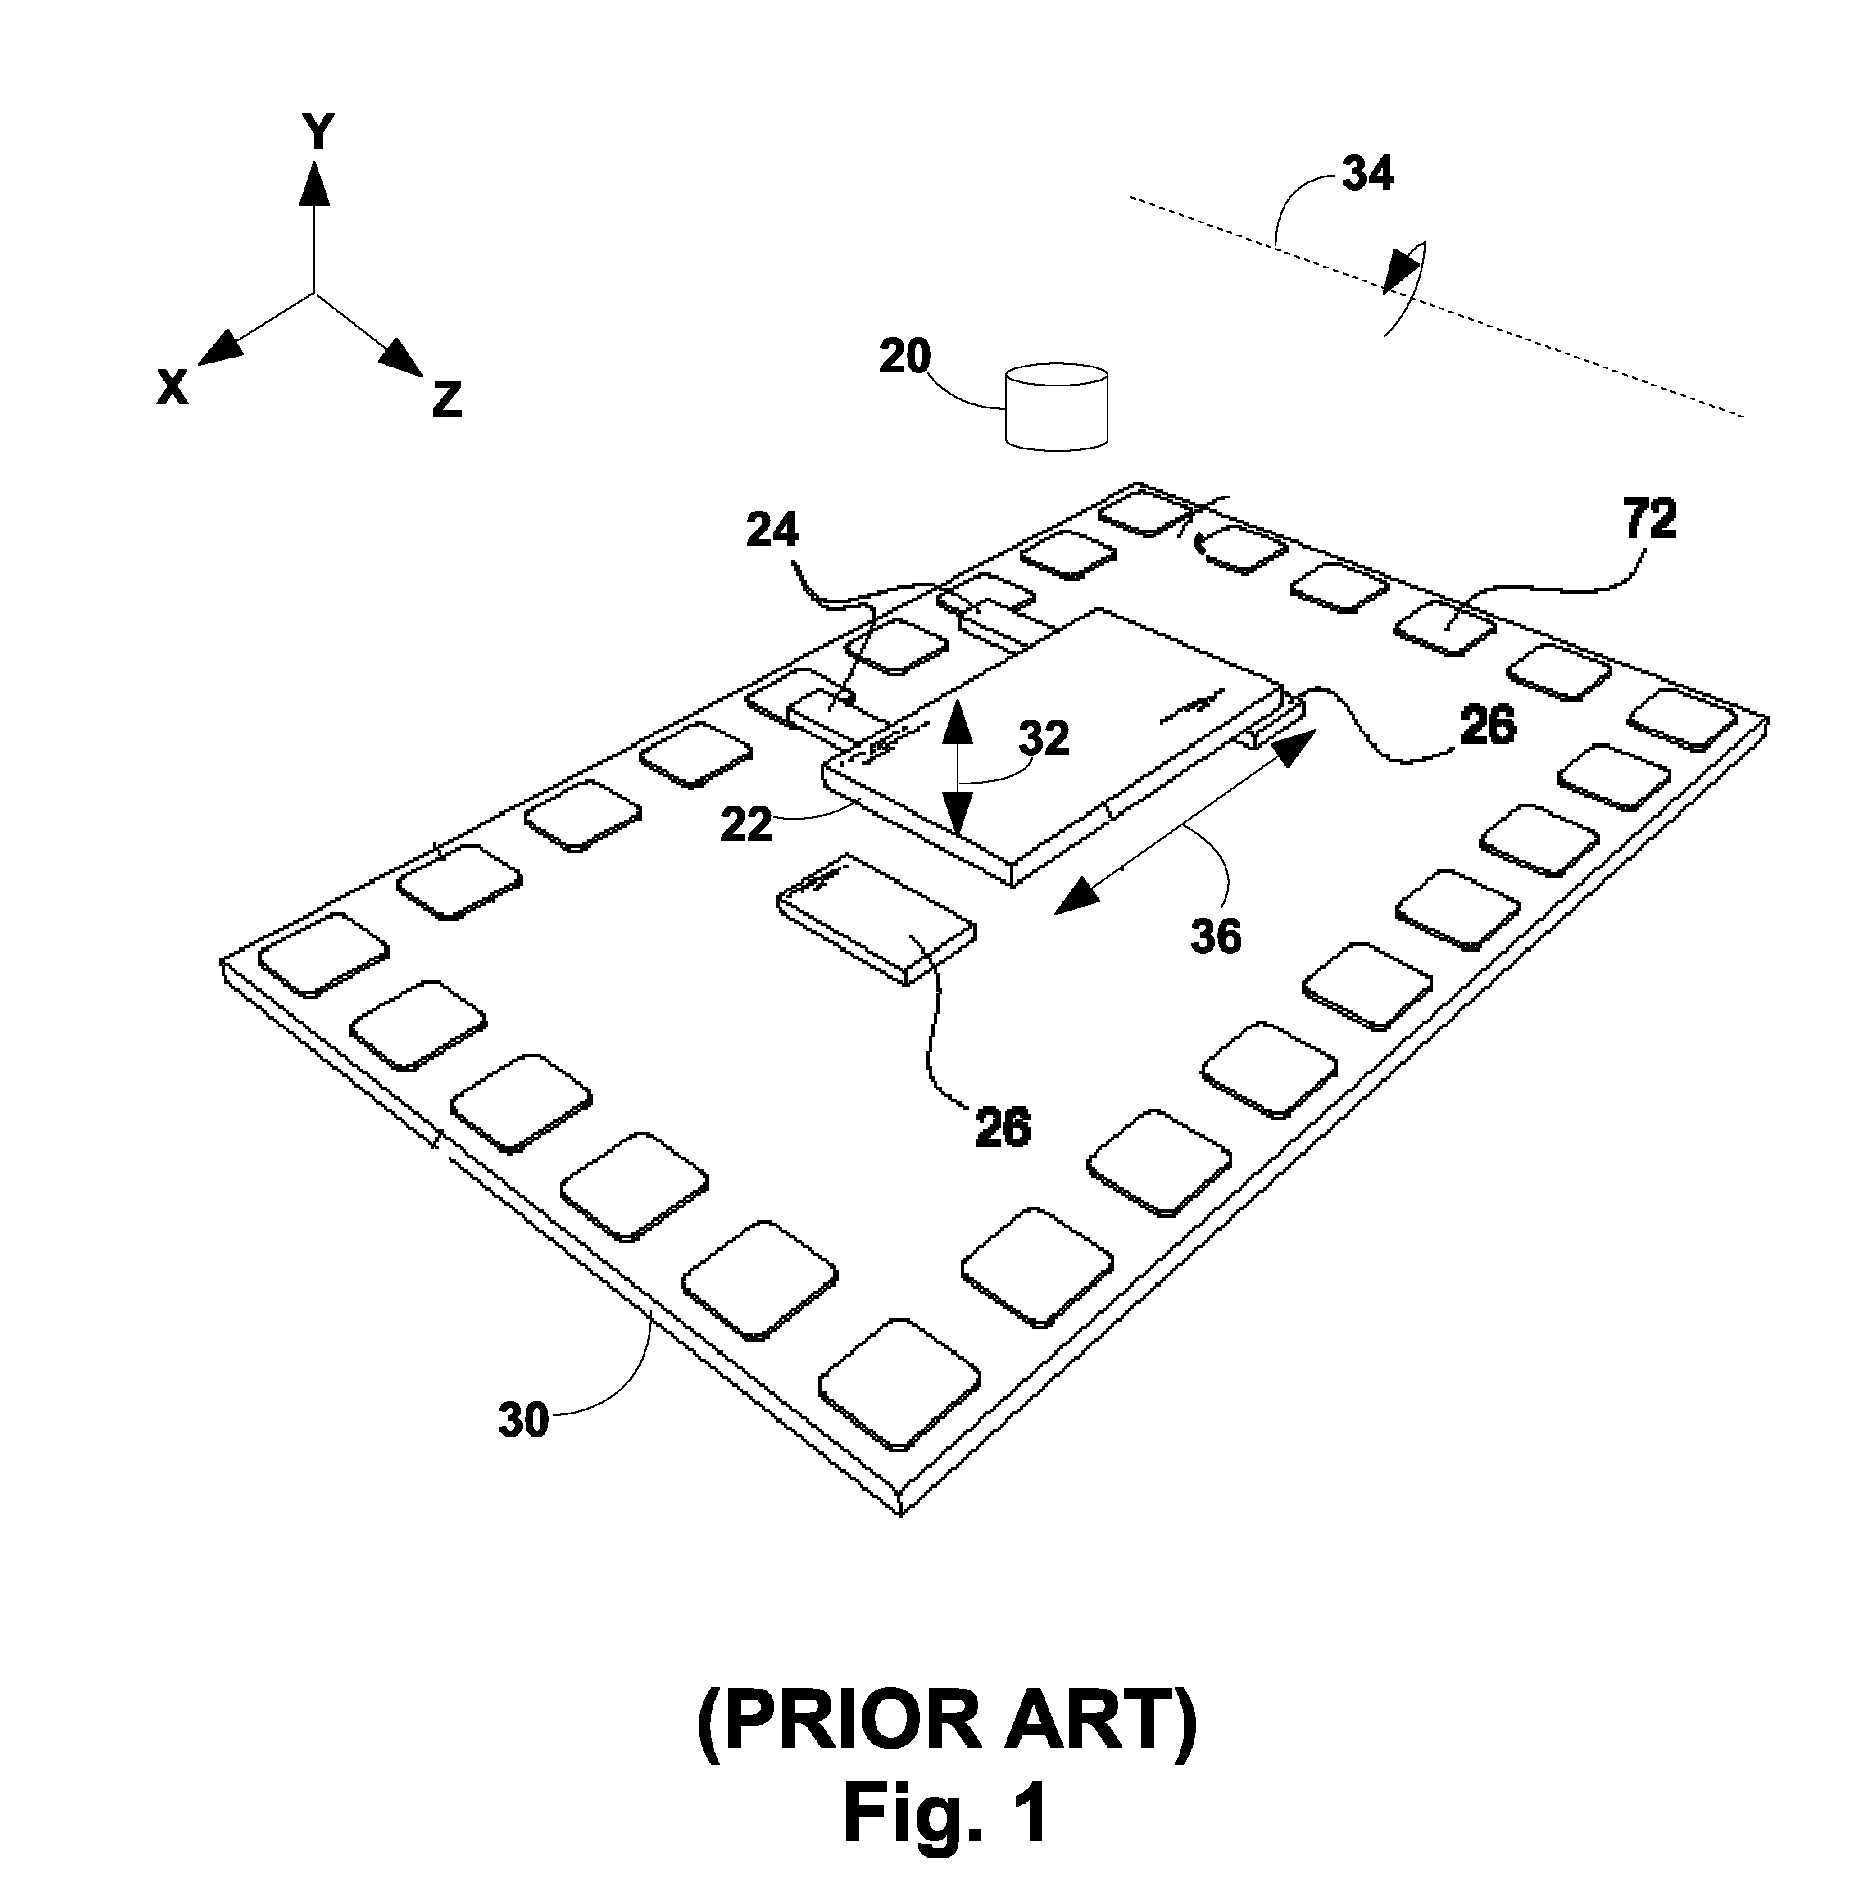 Optomechanical MEMS device including a proof mass and an illumination mitigating mechanism